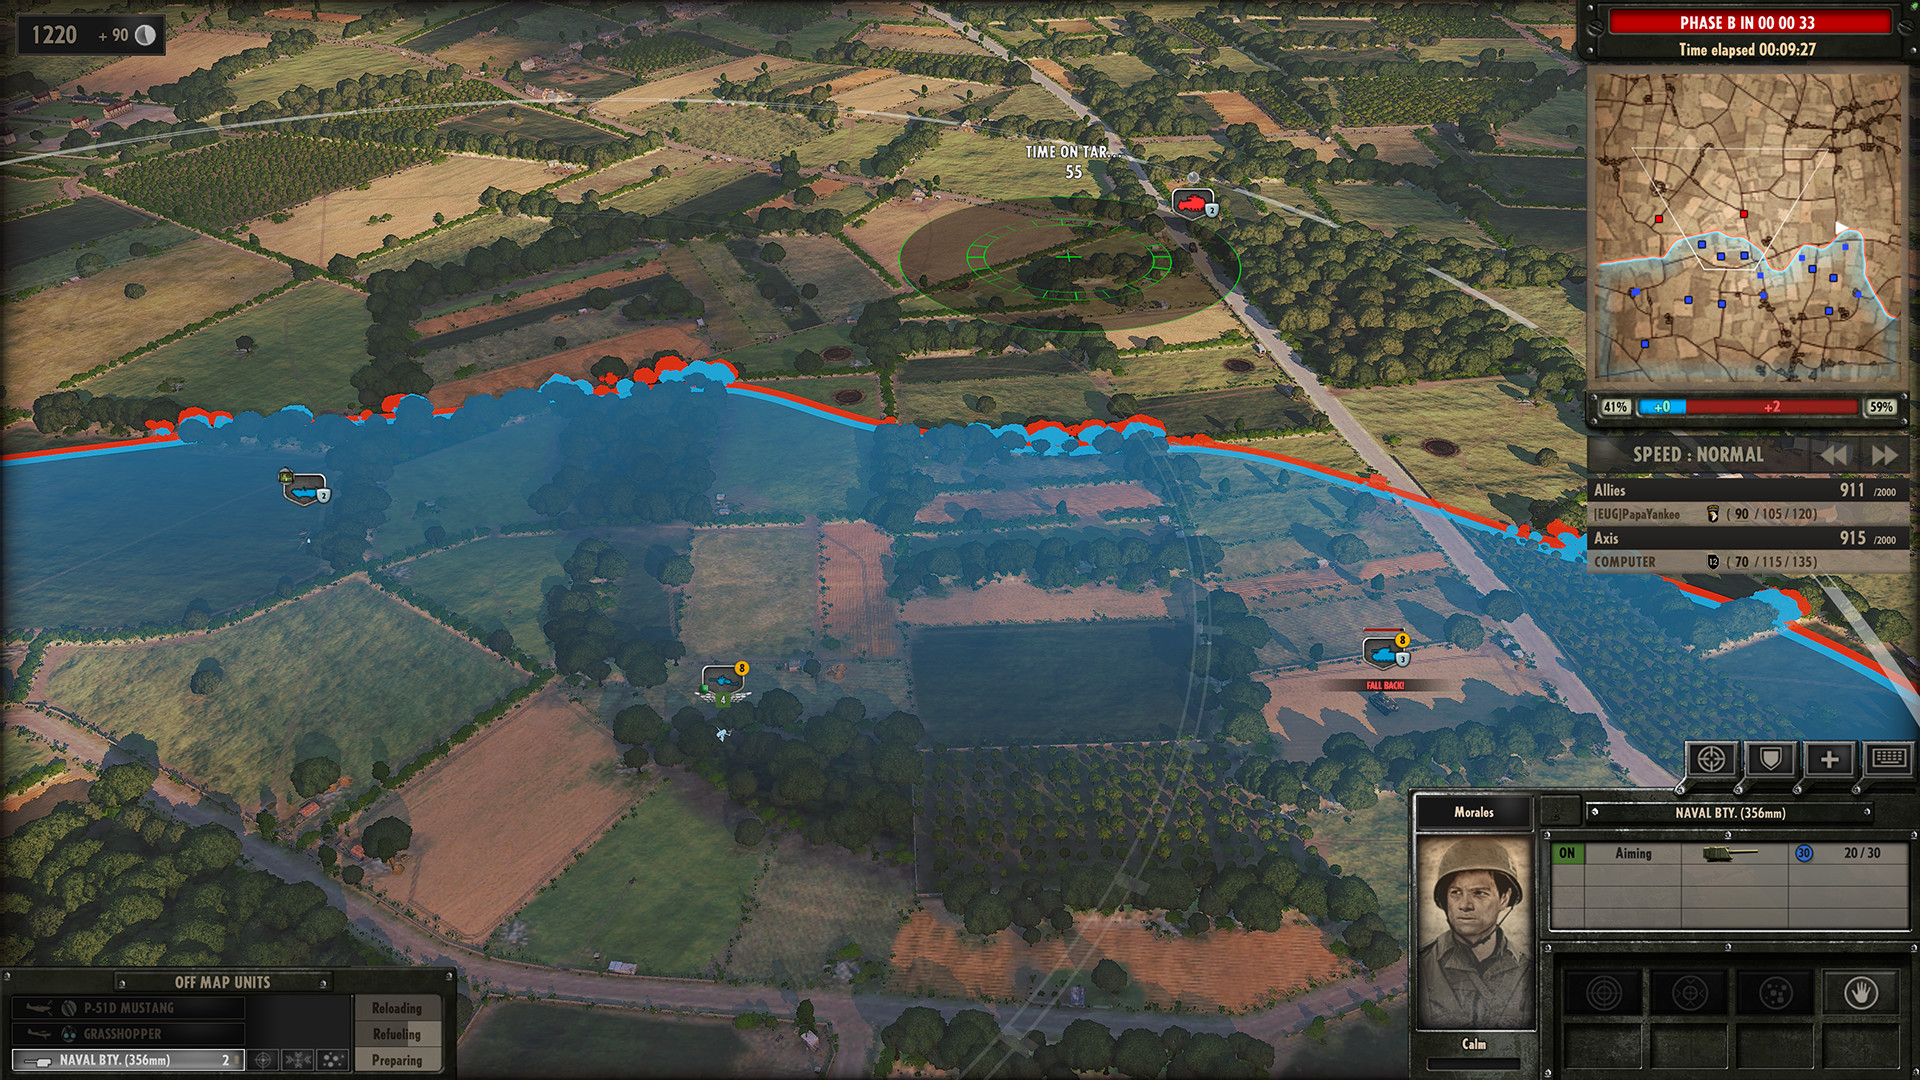 Steel Division Normandy 44 Pc Game Free Download Torrent